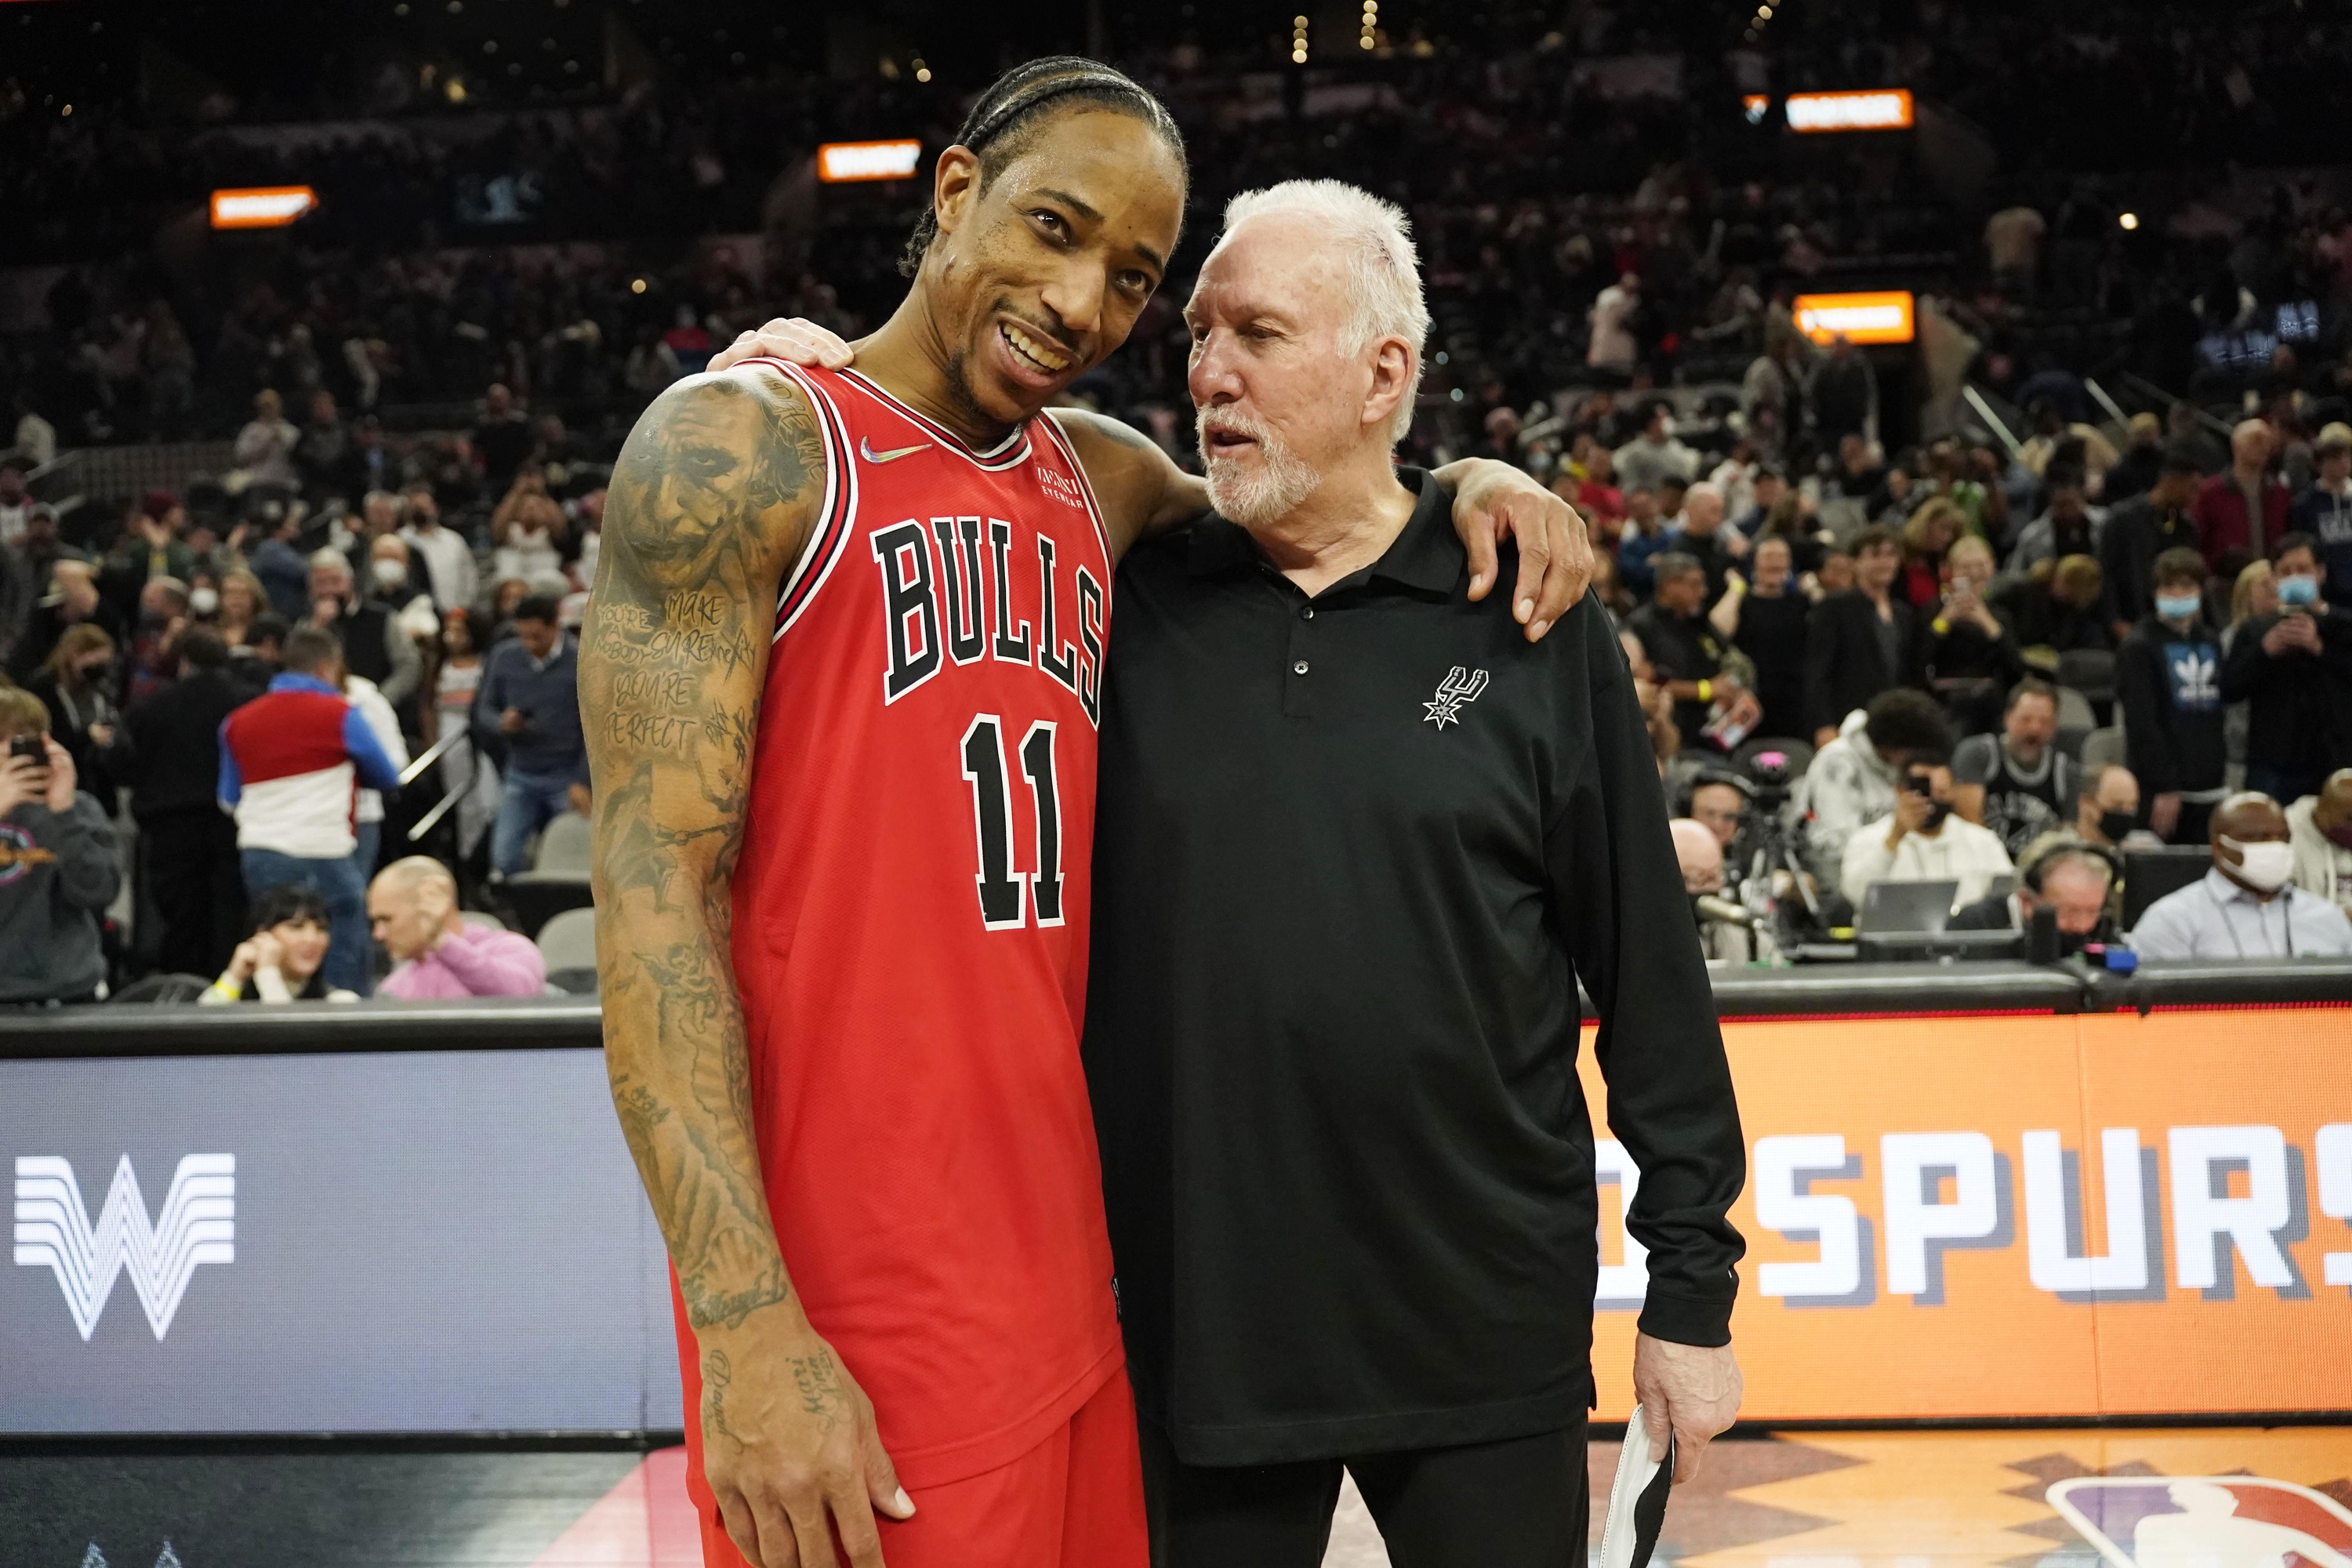 Bulls vs. Spurs Preview How to Watch, Lineups, Injury News, More BVM